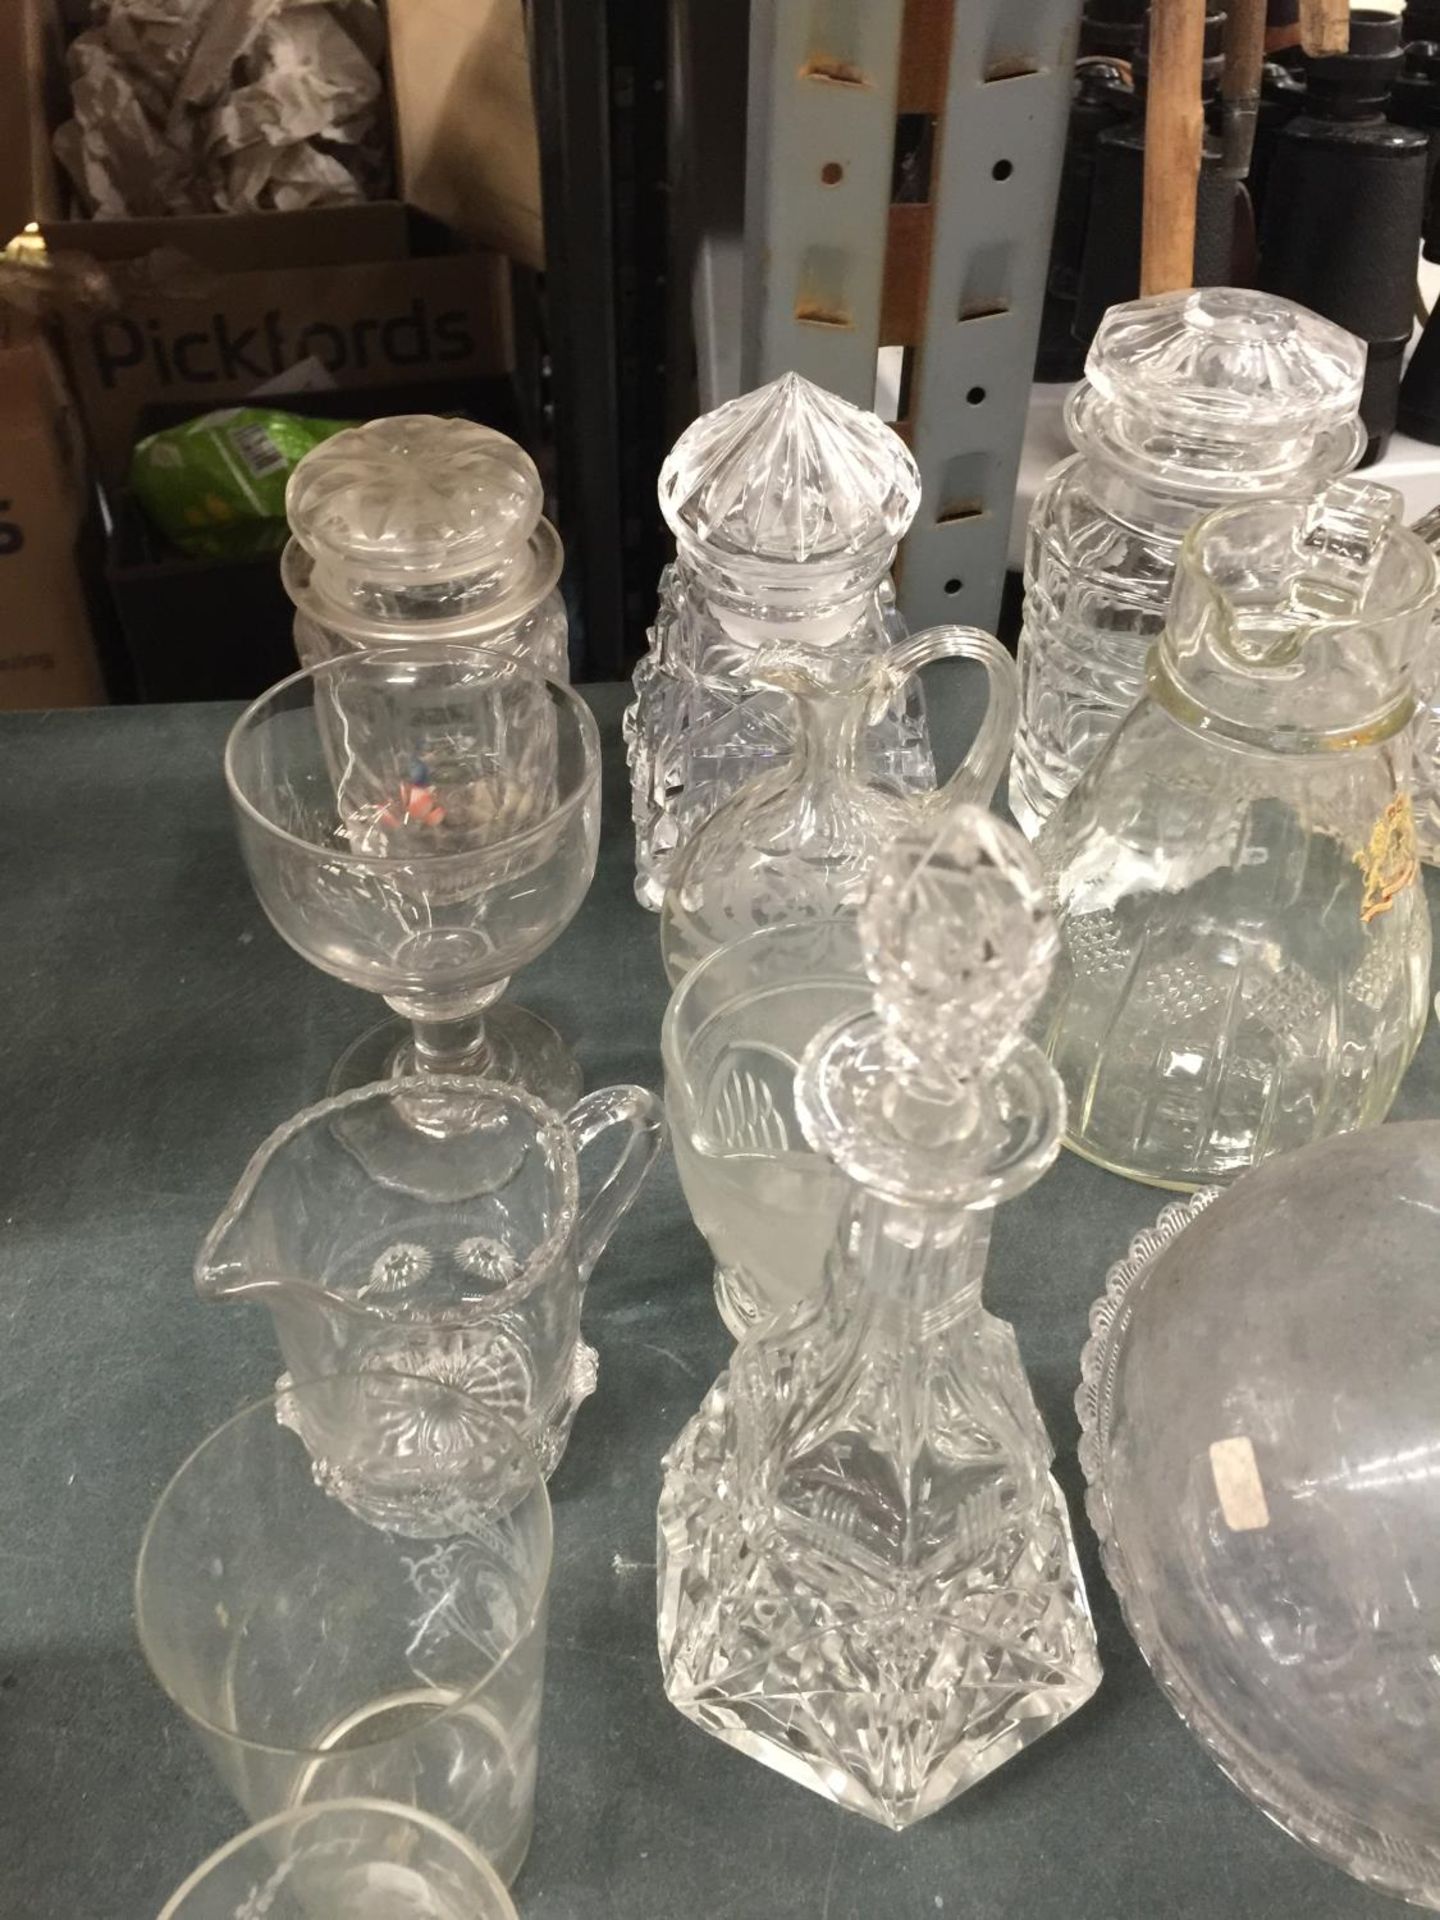 A QUANTITY OF GLASSWARE TO INCLUDE A 19TH CENTURY GLASS BAROMETER - A/F, JUGS, DISHES ETC - Image 2 of 6